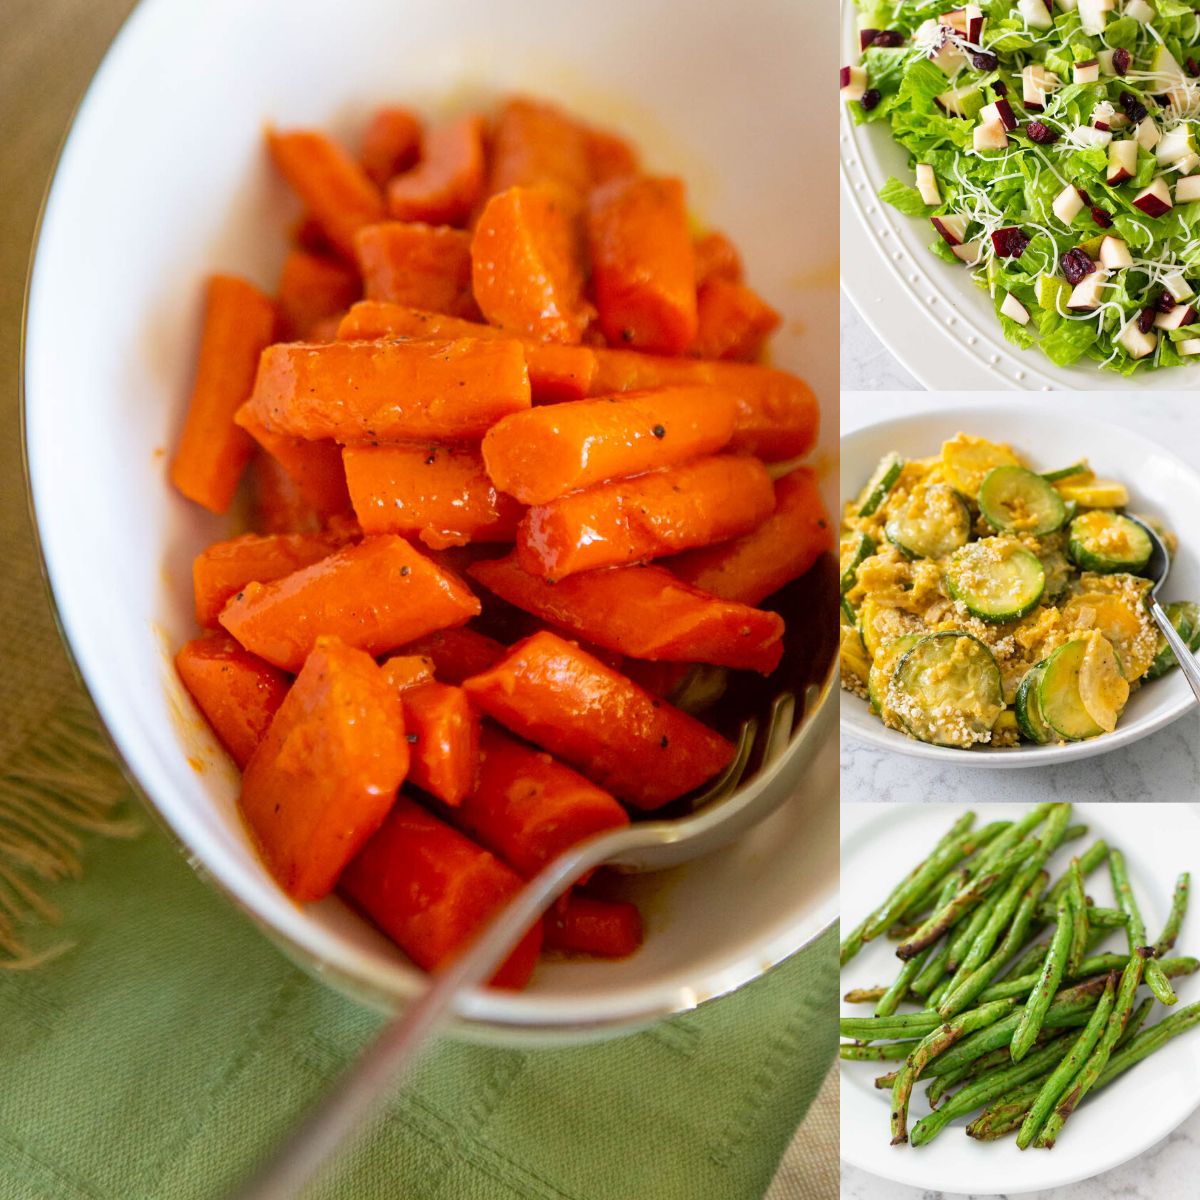 The photo collage shows a serving bowl of glazed carrots, a Thanksgiving salad, squash casserole, and roasted green beans.